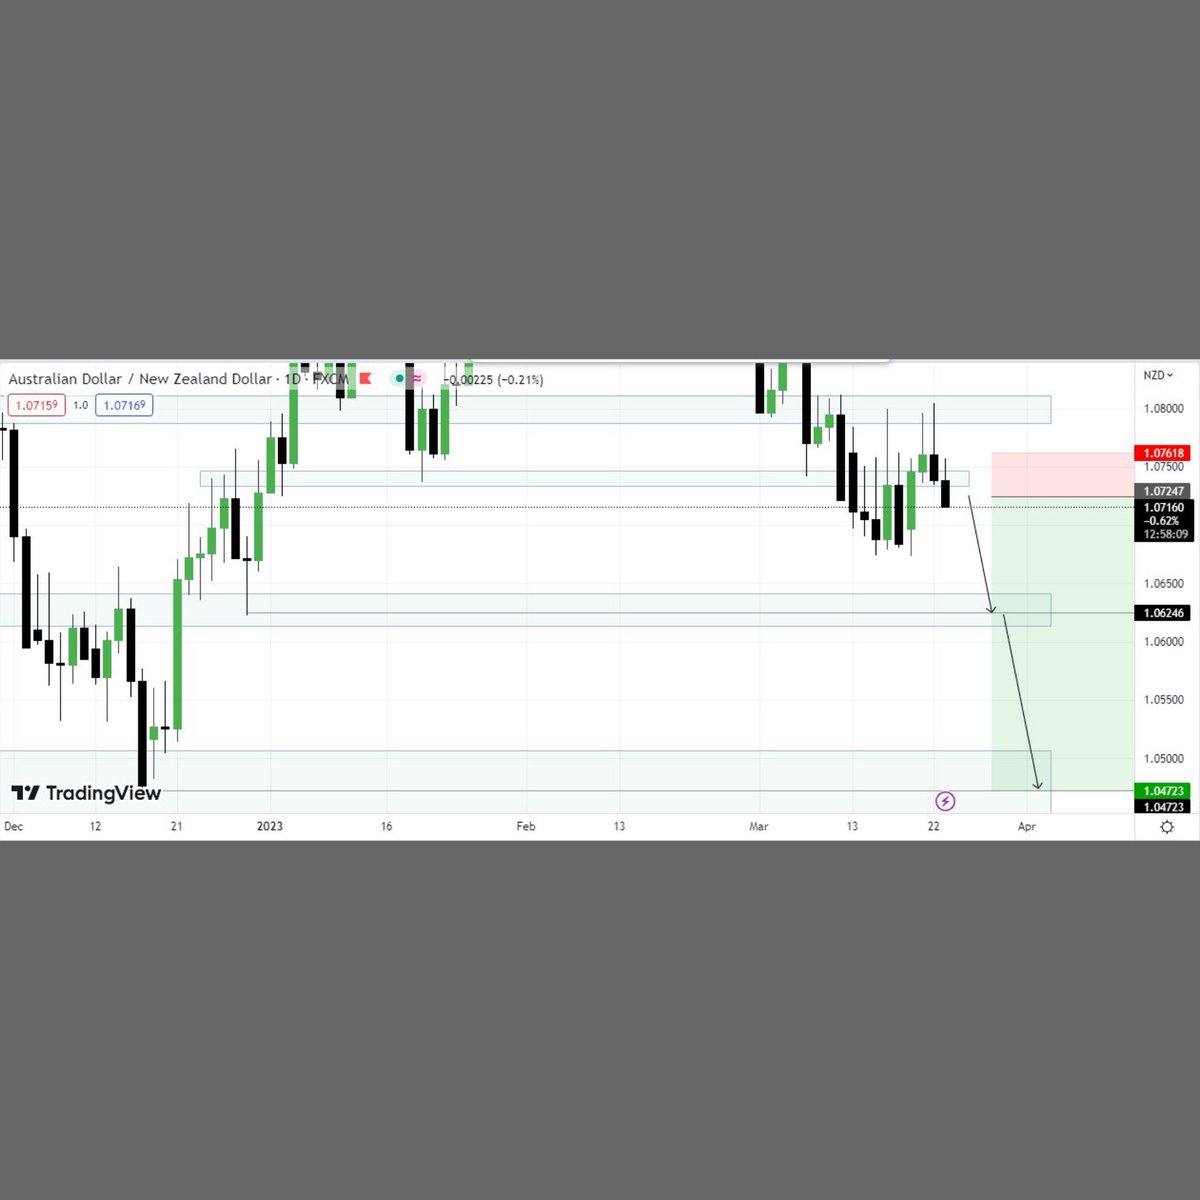 AUDNZD Looking 🐻 📈📉
.
#forex #forextrading #fxlifestyle #btc #bitcoin #crypto #cryptocurrency